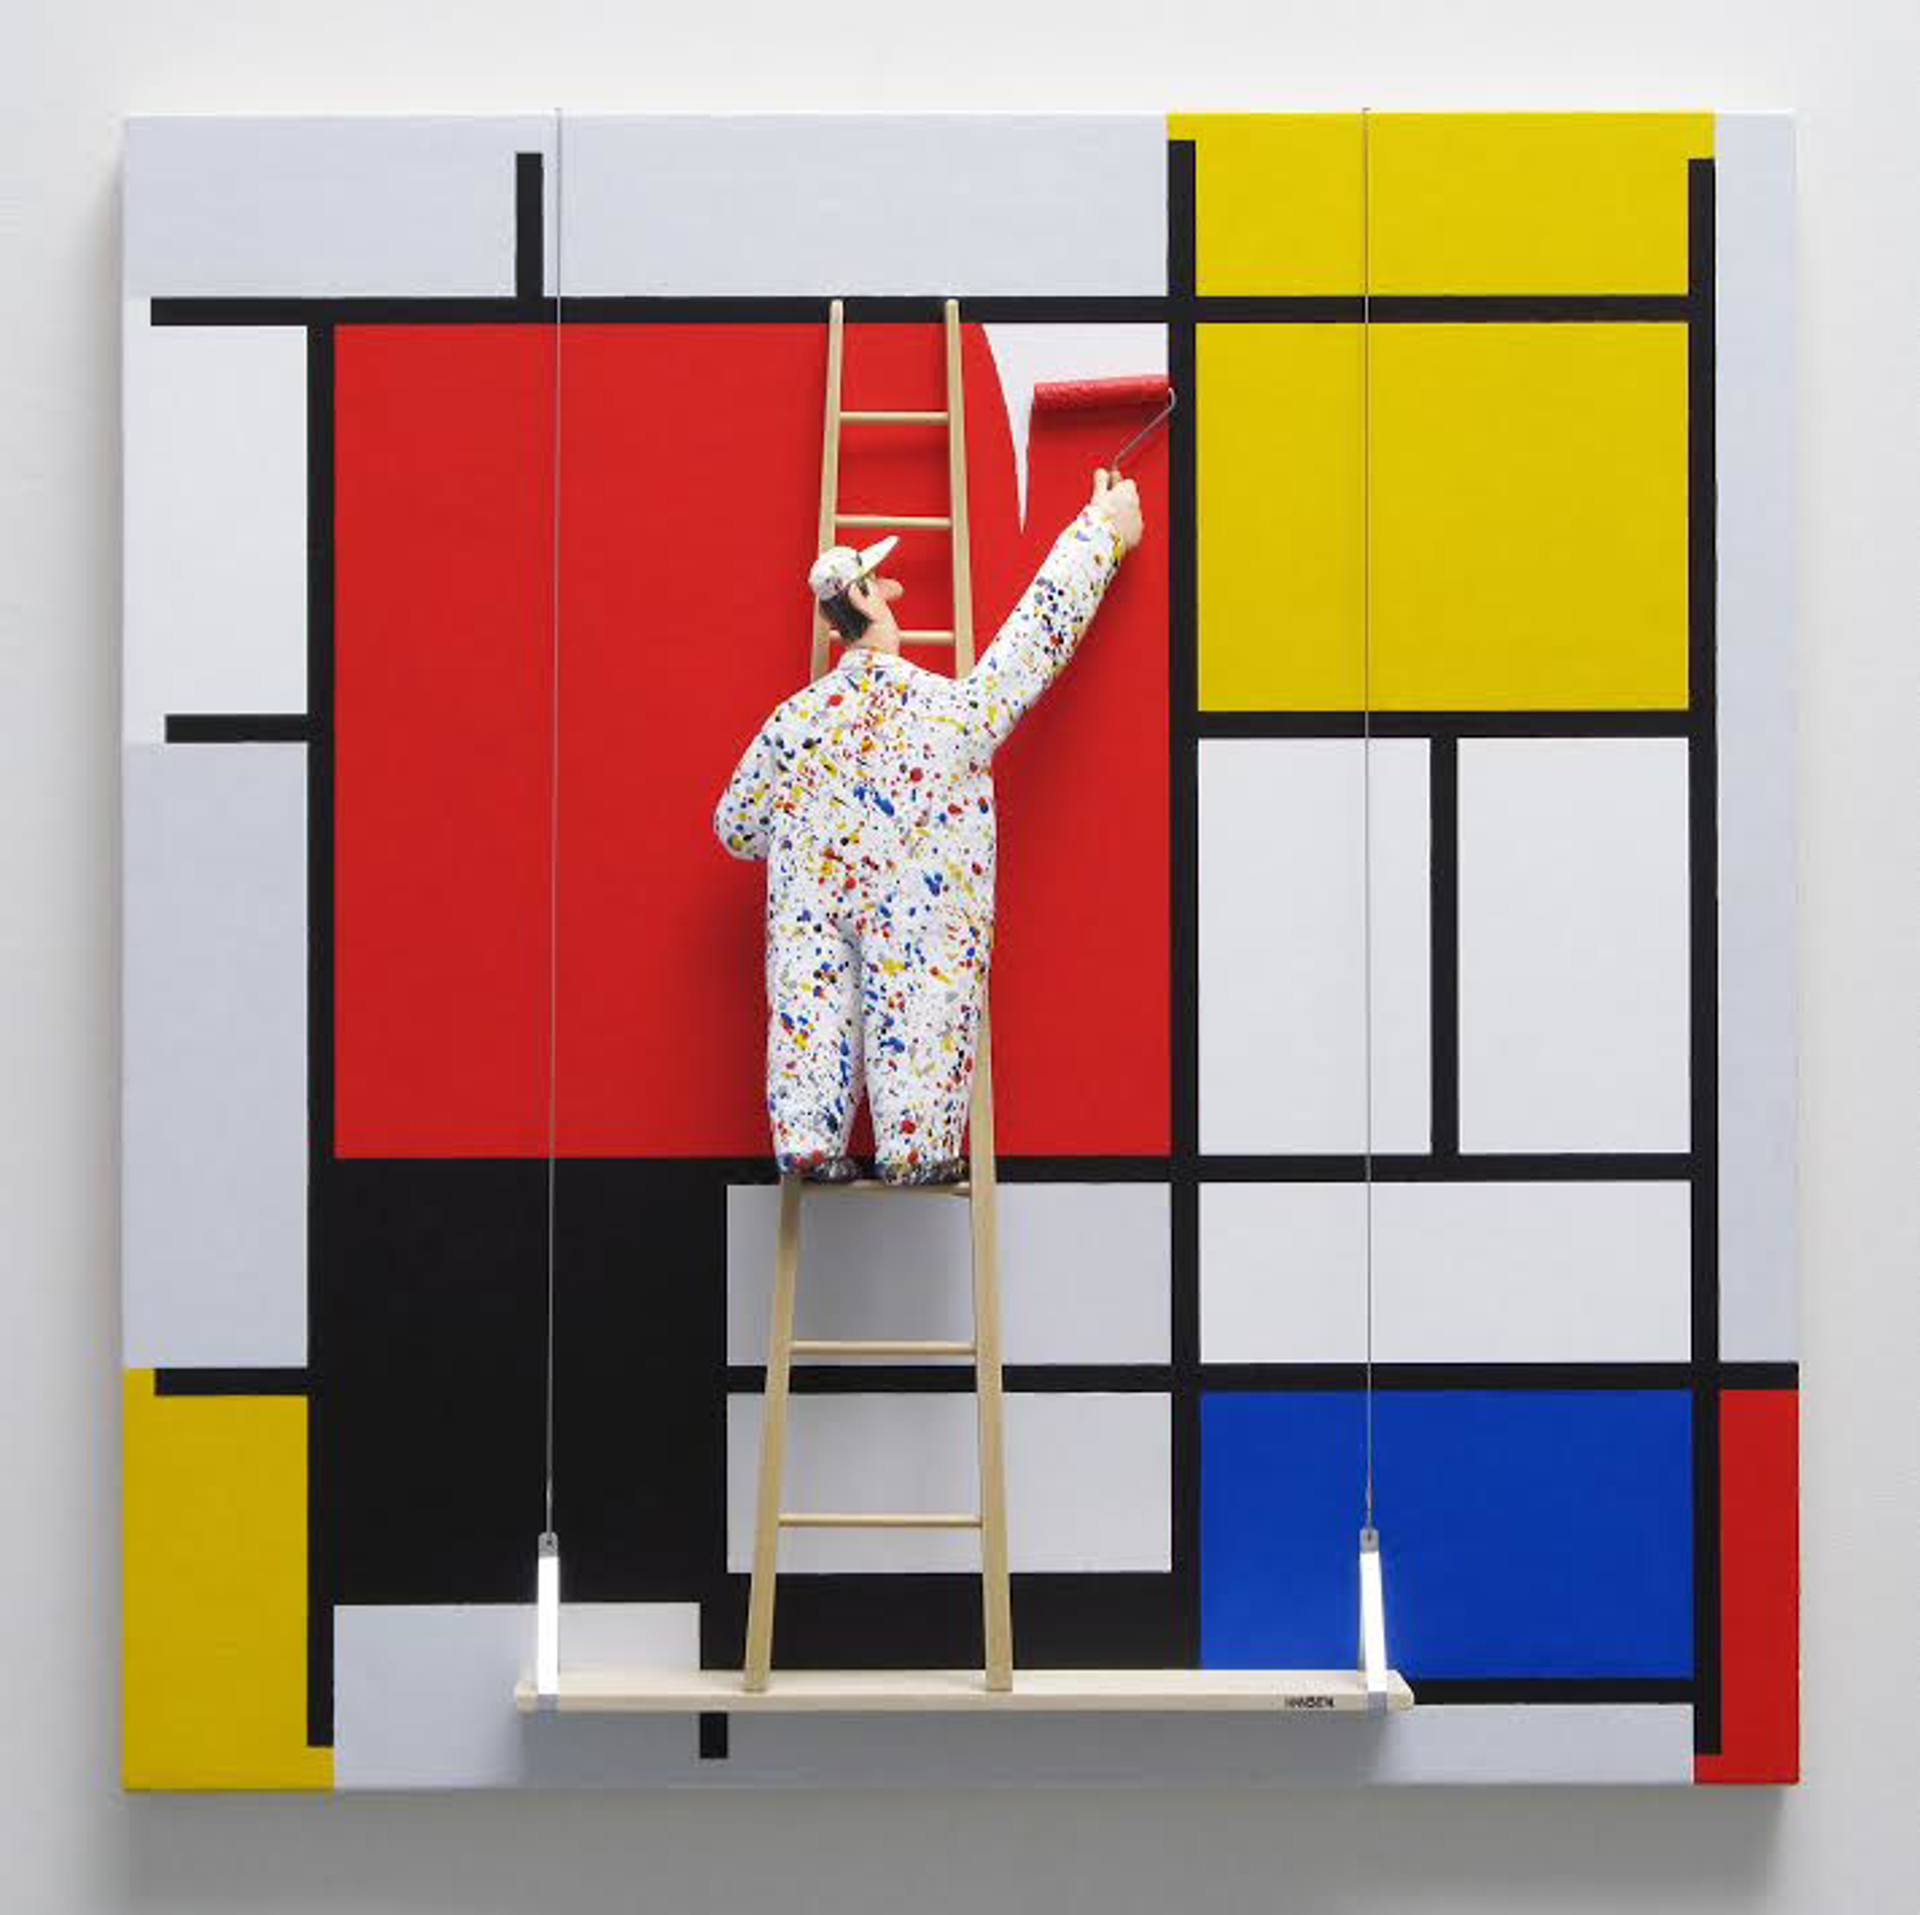 Composition with Large Red Plane (Mondrian) by Stephen Hansen